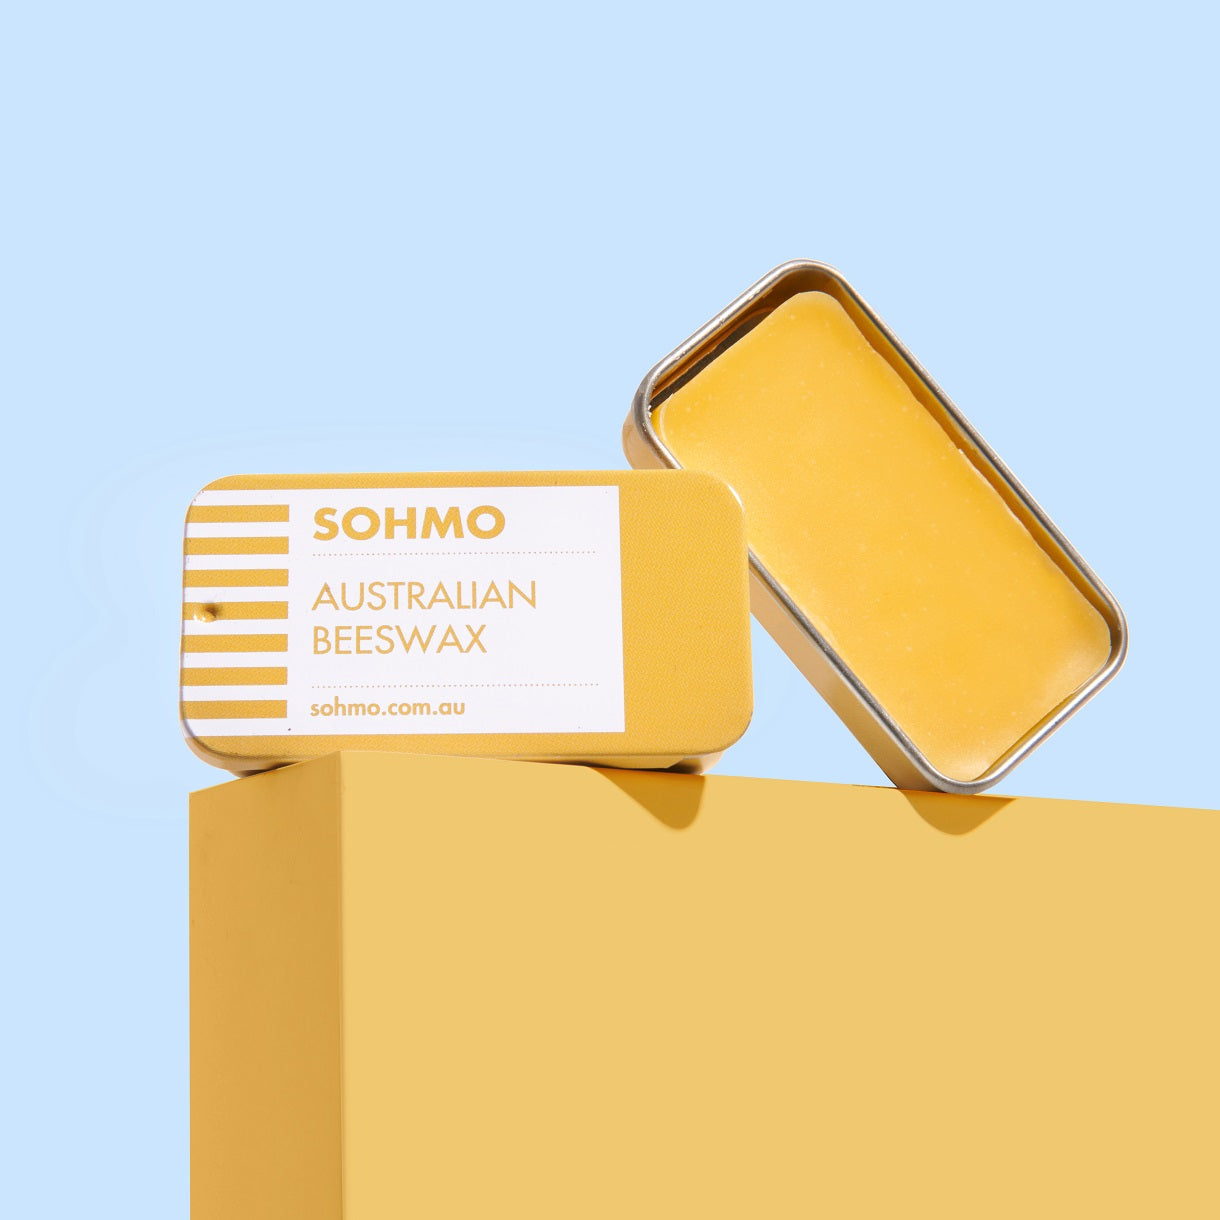 SOHMO Australian Beeswax in Tin for hand sewing